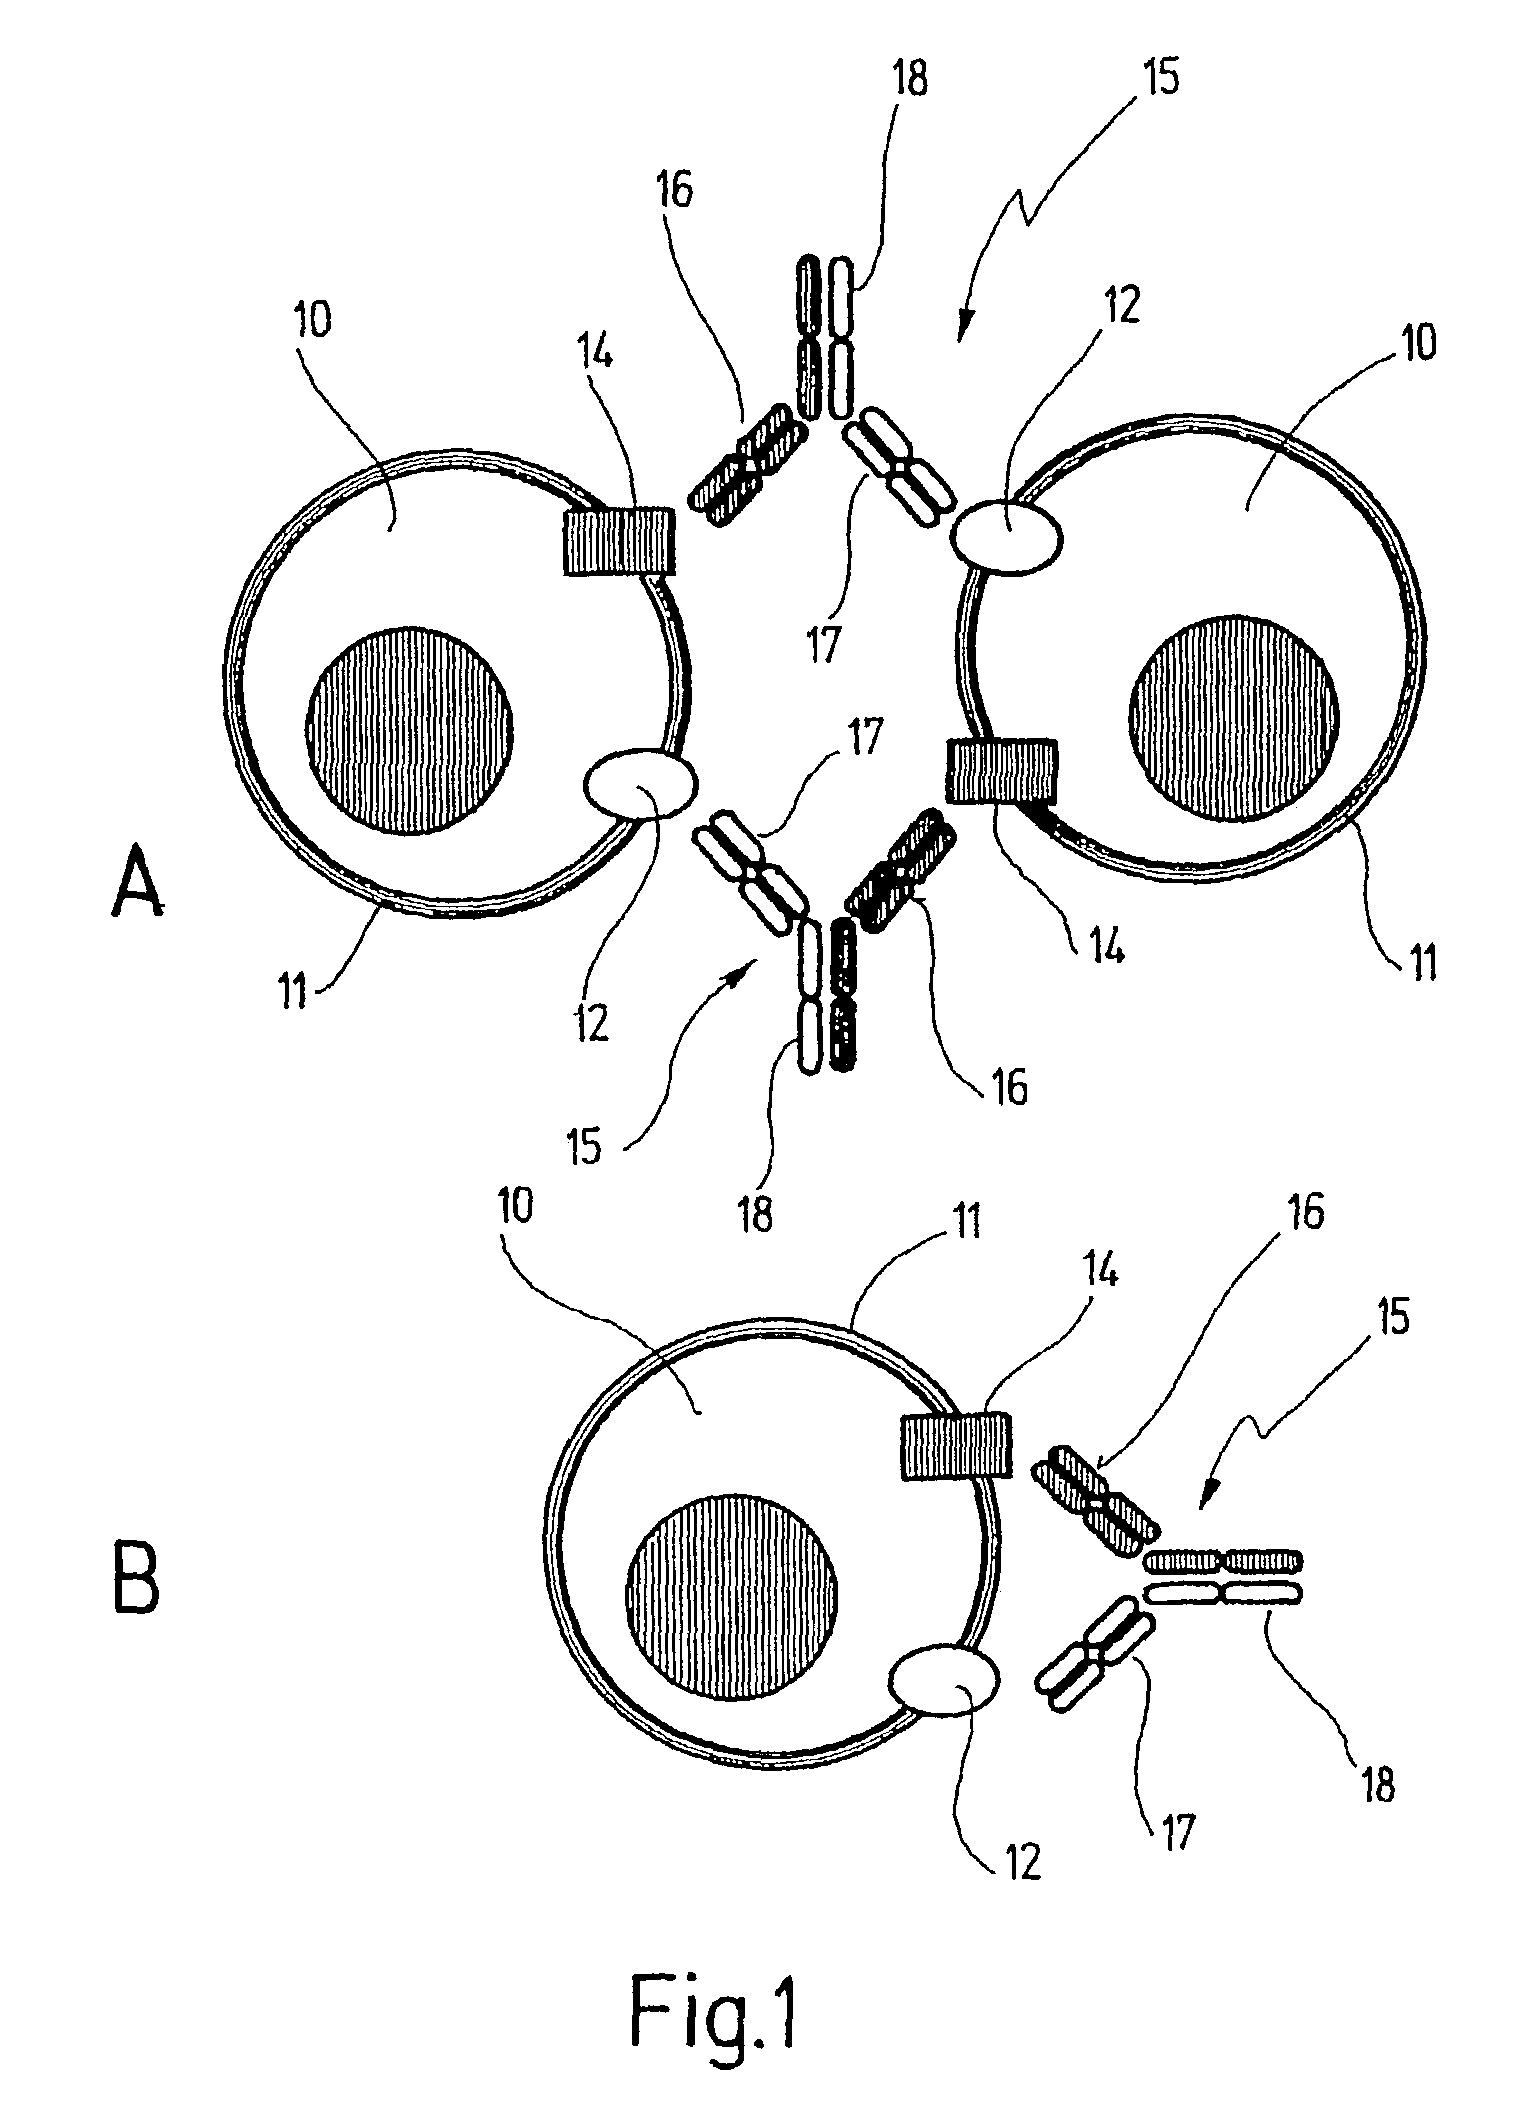 Multispecific reagent for selectively stimulating cell surface receptors